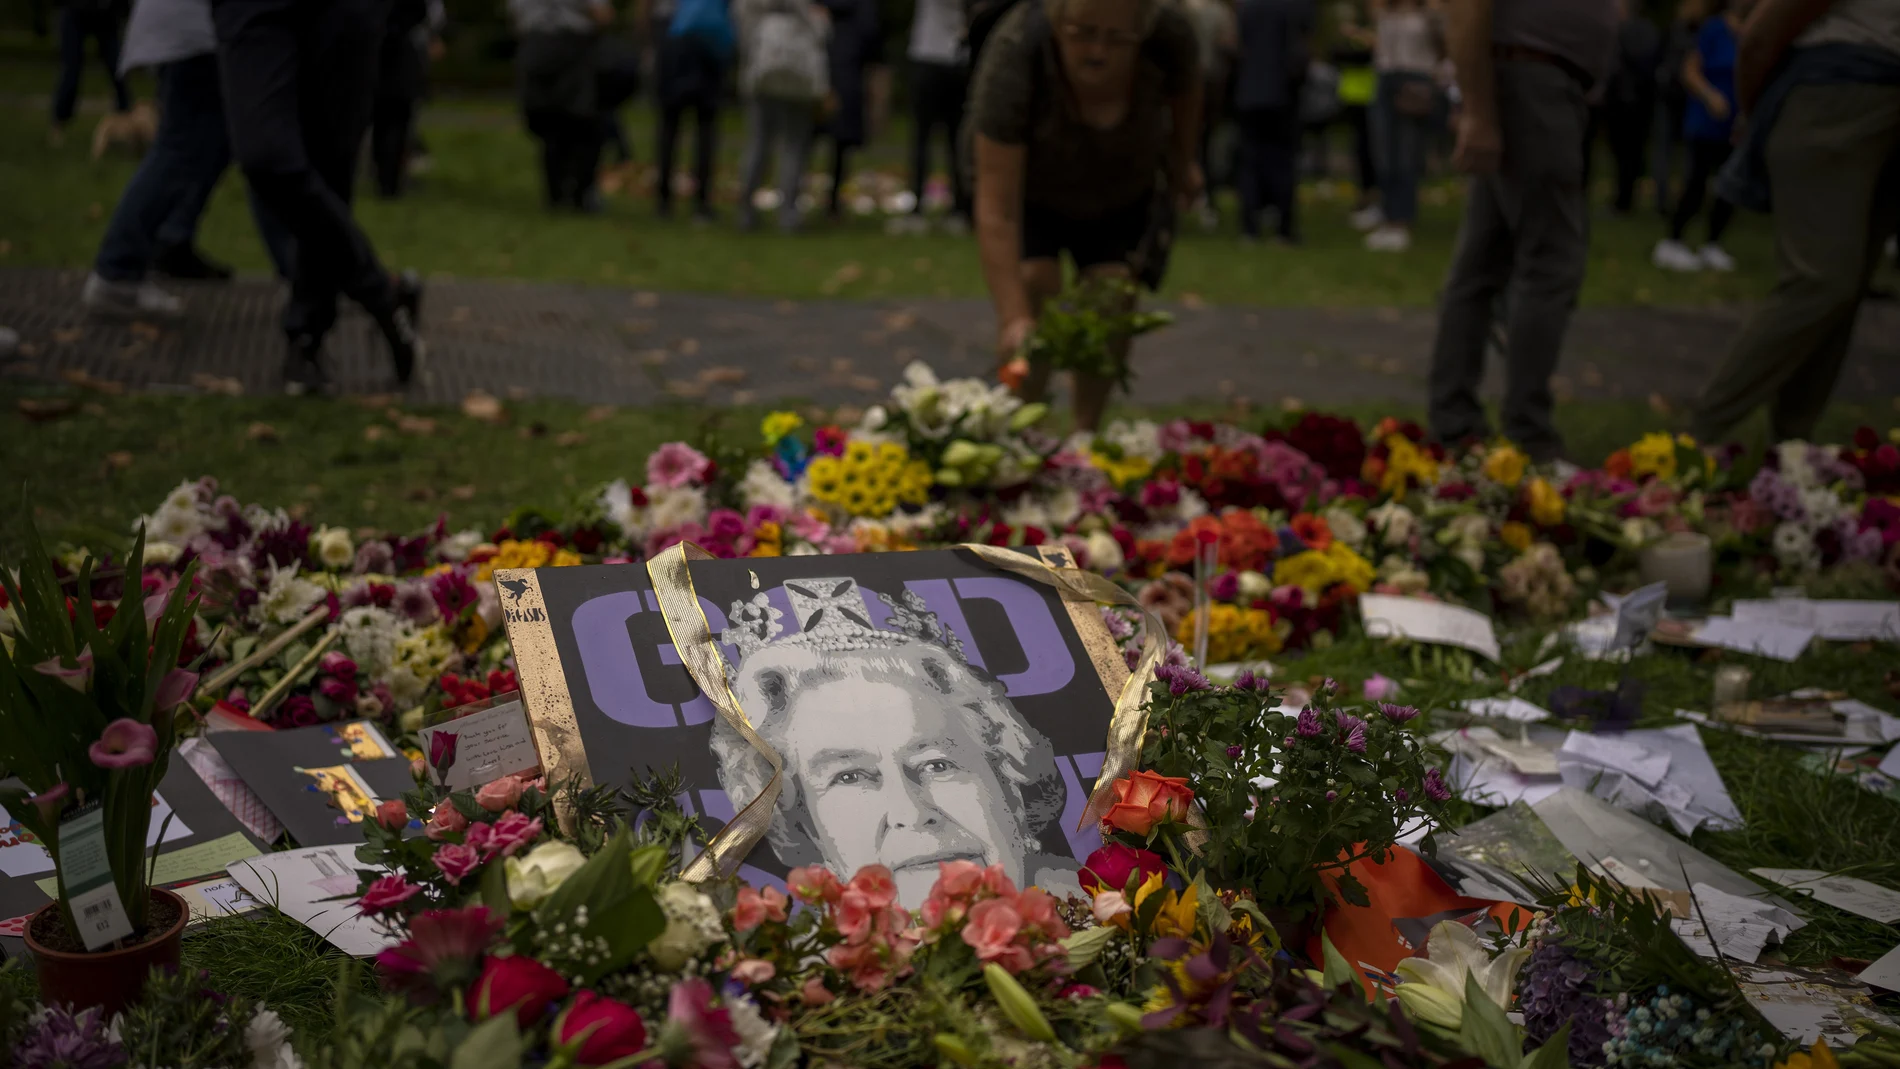 Flowers and candles for Queen Elizabeth II are seen at the gates outside Buckingham Palace in London, Saturday, Sept. 10, 2022. Queen Elizabeth II, Britain's longest-reigning monarch and a rock of stability across much of a turbulent century, died Thursday Sept. 8, 2022, after 70 years on the throne. She was 96. (AP Photo/Emilio Morenatti)